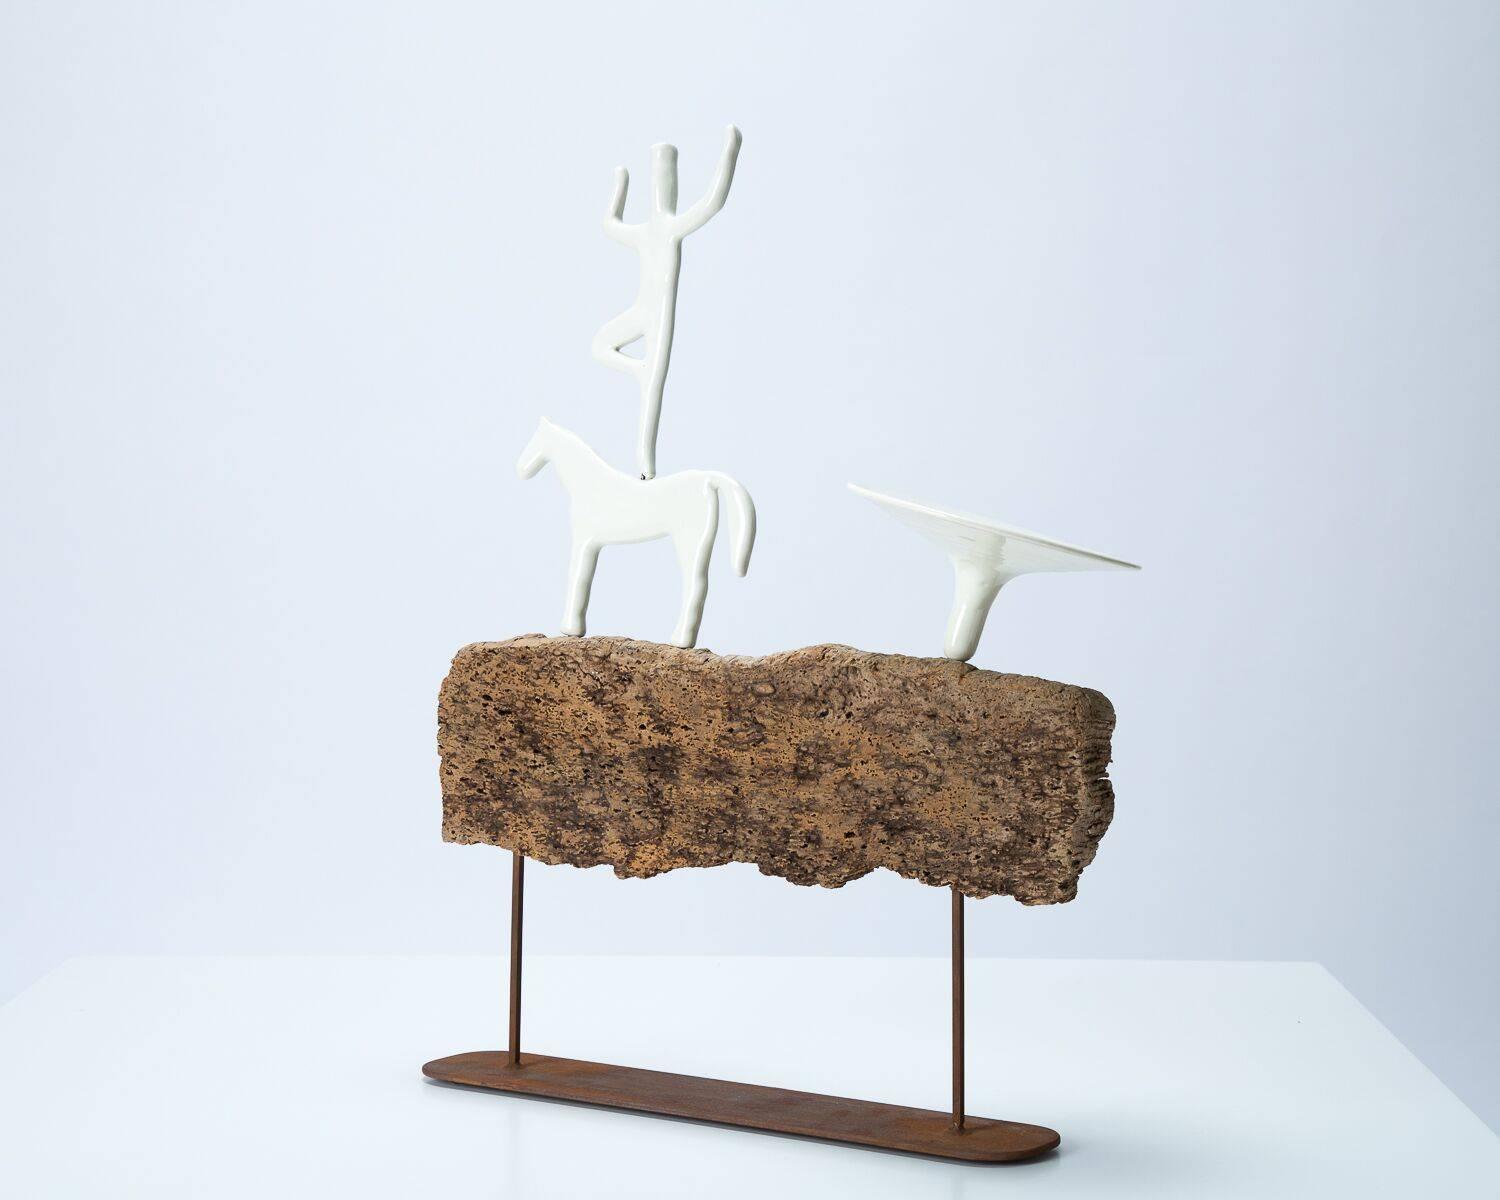 This signed decorative sculpture was made by the Italian artist Andrea Branzi. 

Andrea Branzi was born in Florence in 1938 and studied as an architect at the Florence School of Architecture, receiving a degree in 1966. From 1964 to 1974, he was a